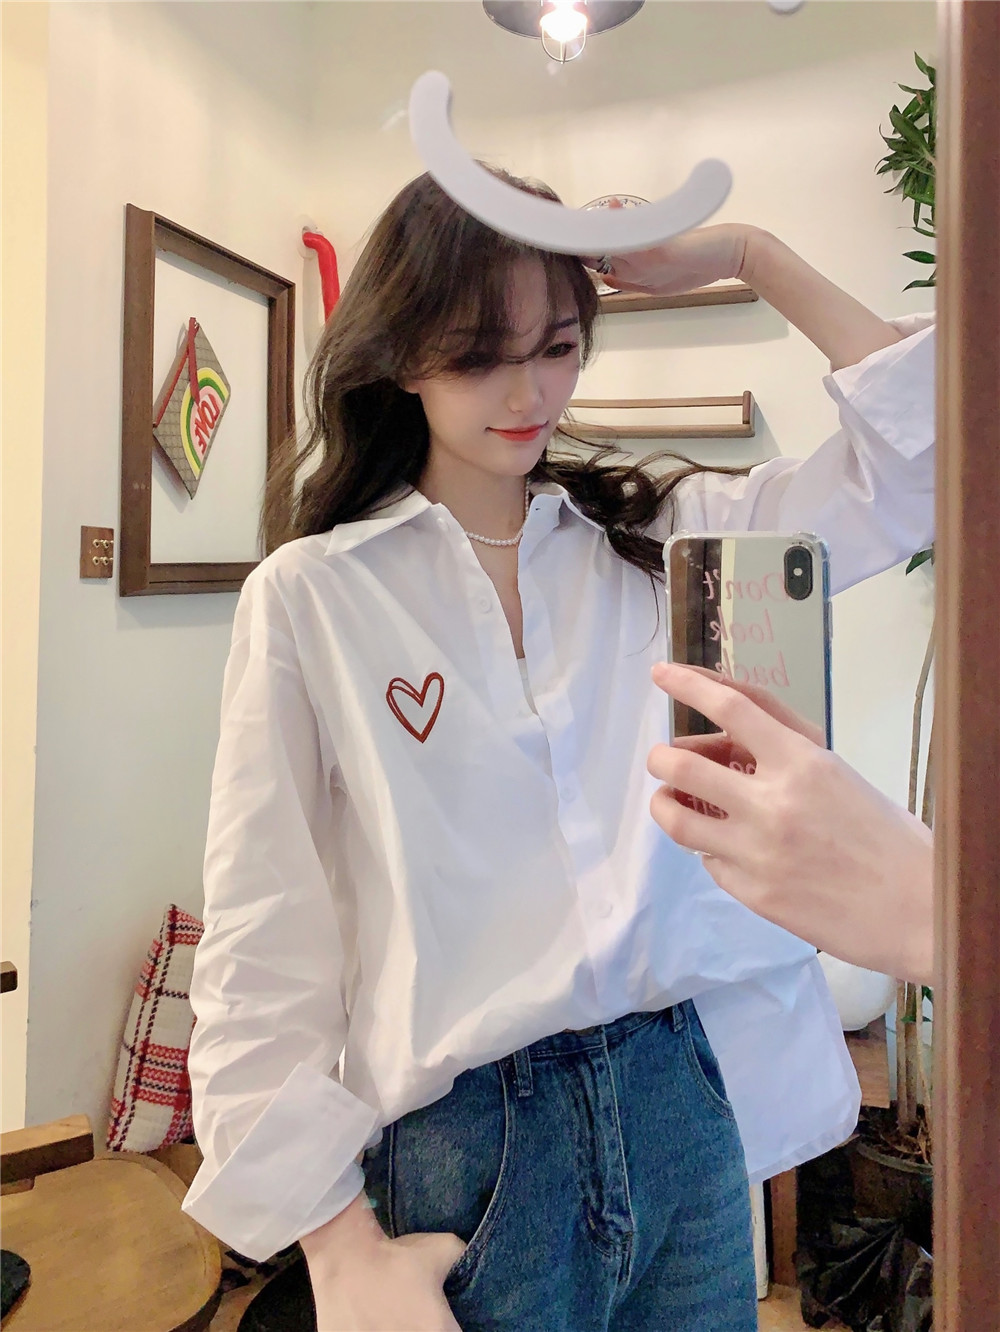 Real shot embroidered love shirt top for women